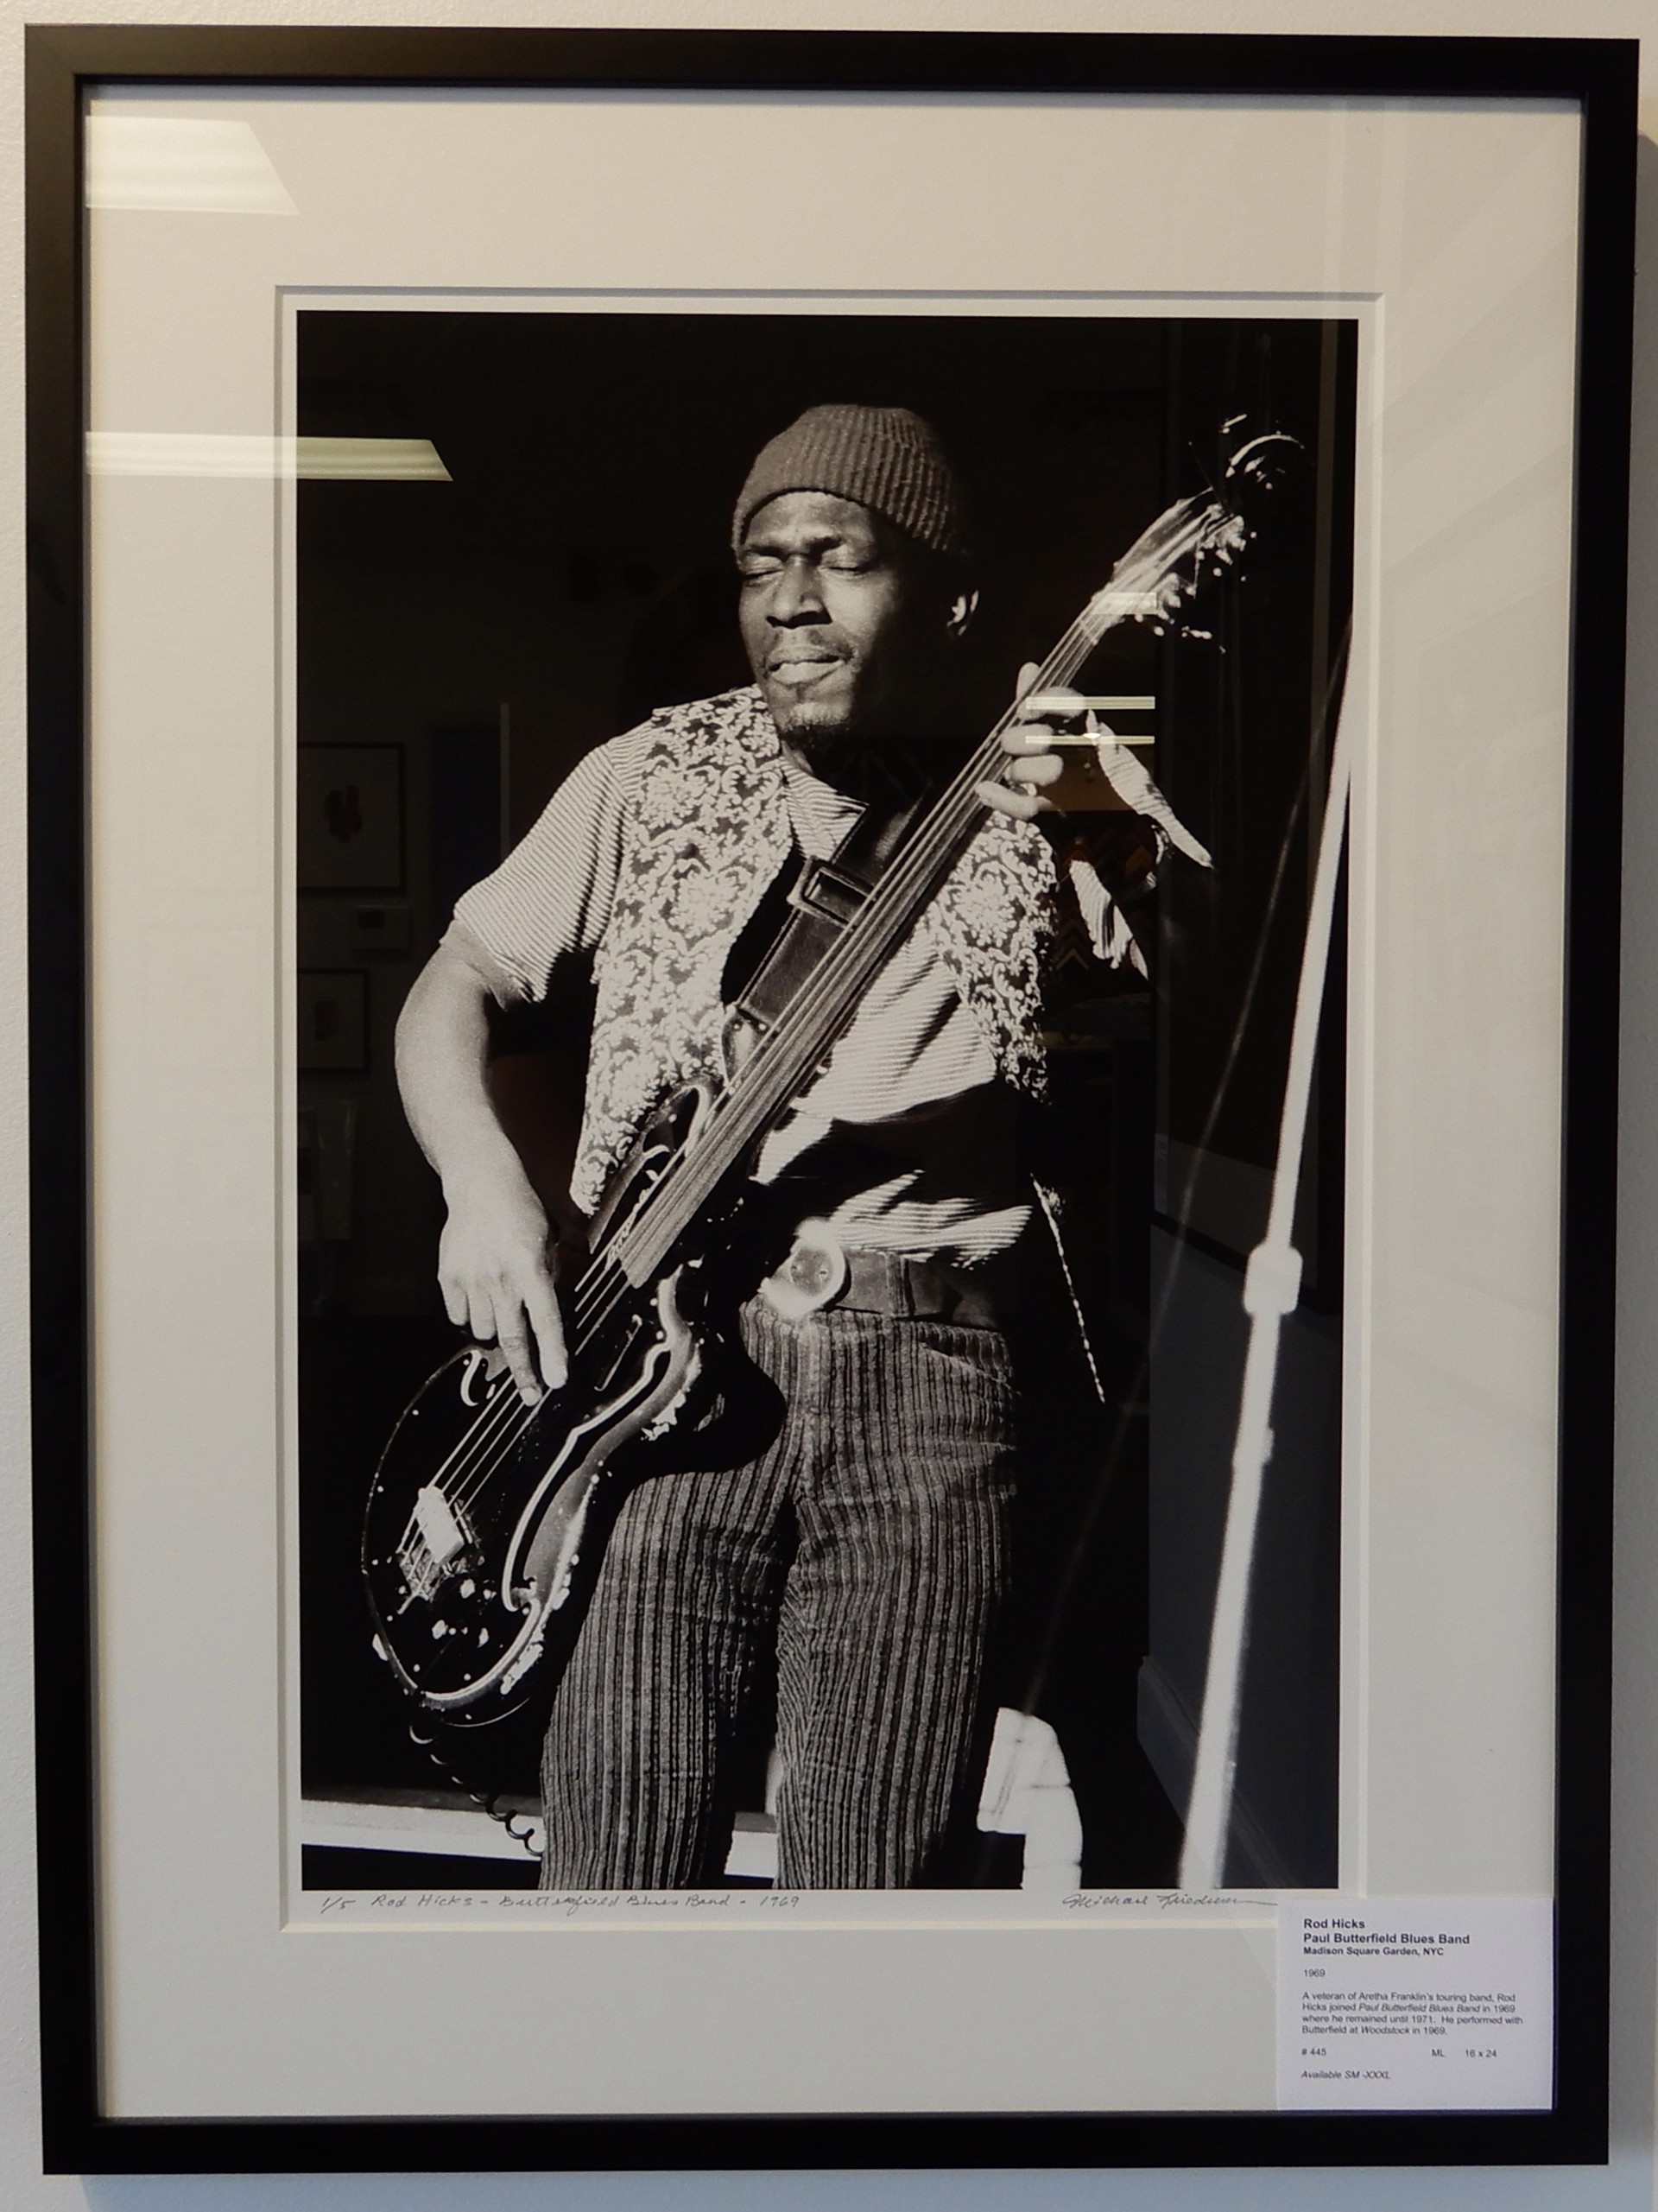 ROD HICKS, Paul Butterfield Blues Band, Madison Square Garden, NYC by Michael Friedman